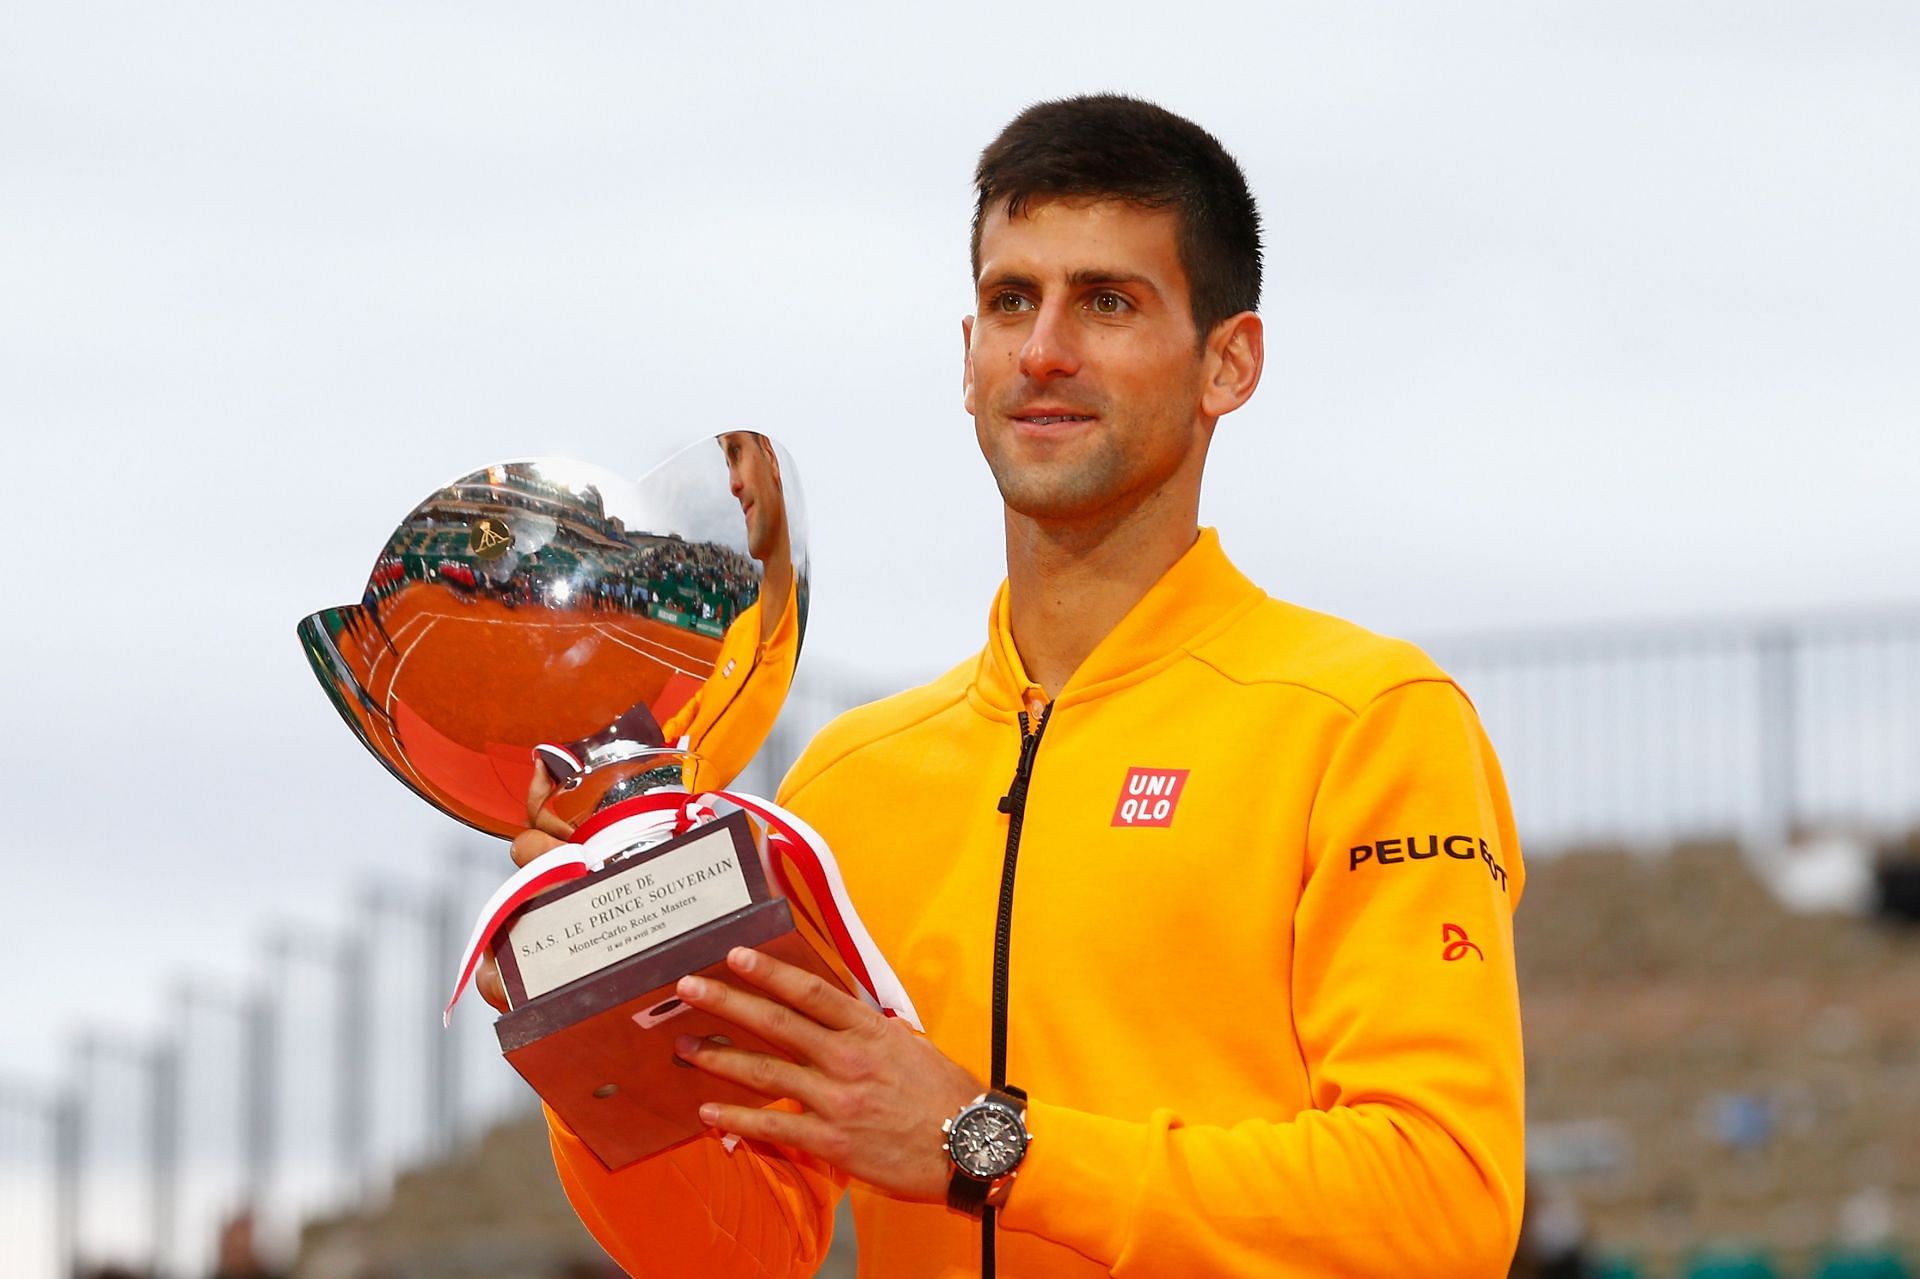 Novak Djokovic is scheduled to play at the Monte-Carlo Masters up next